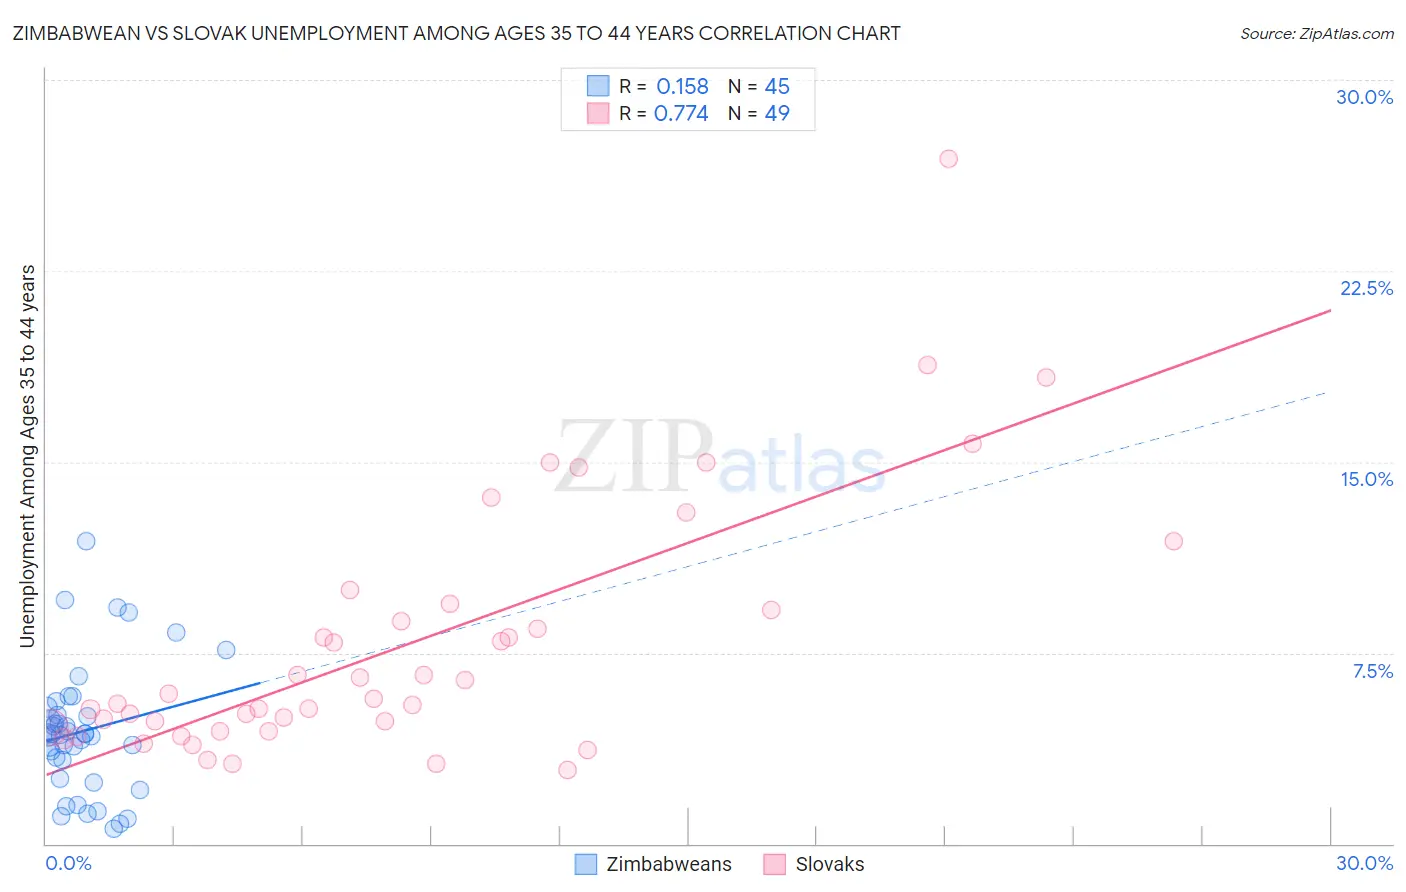 Zimbabwean vs Slovak Unemployment Among Ages 35 to 44 years